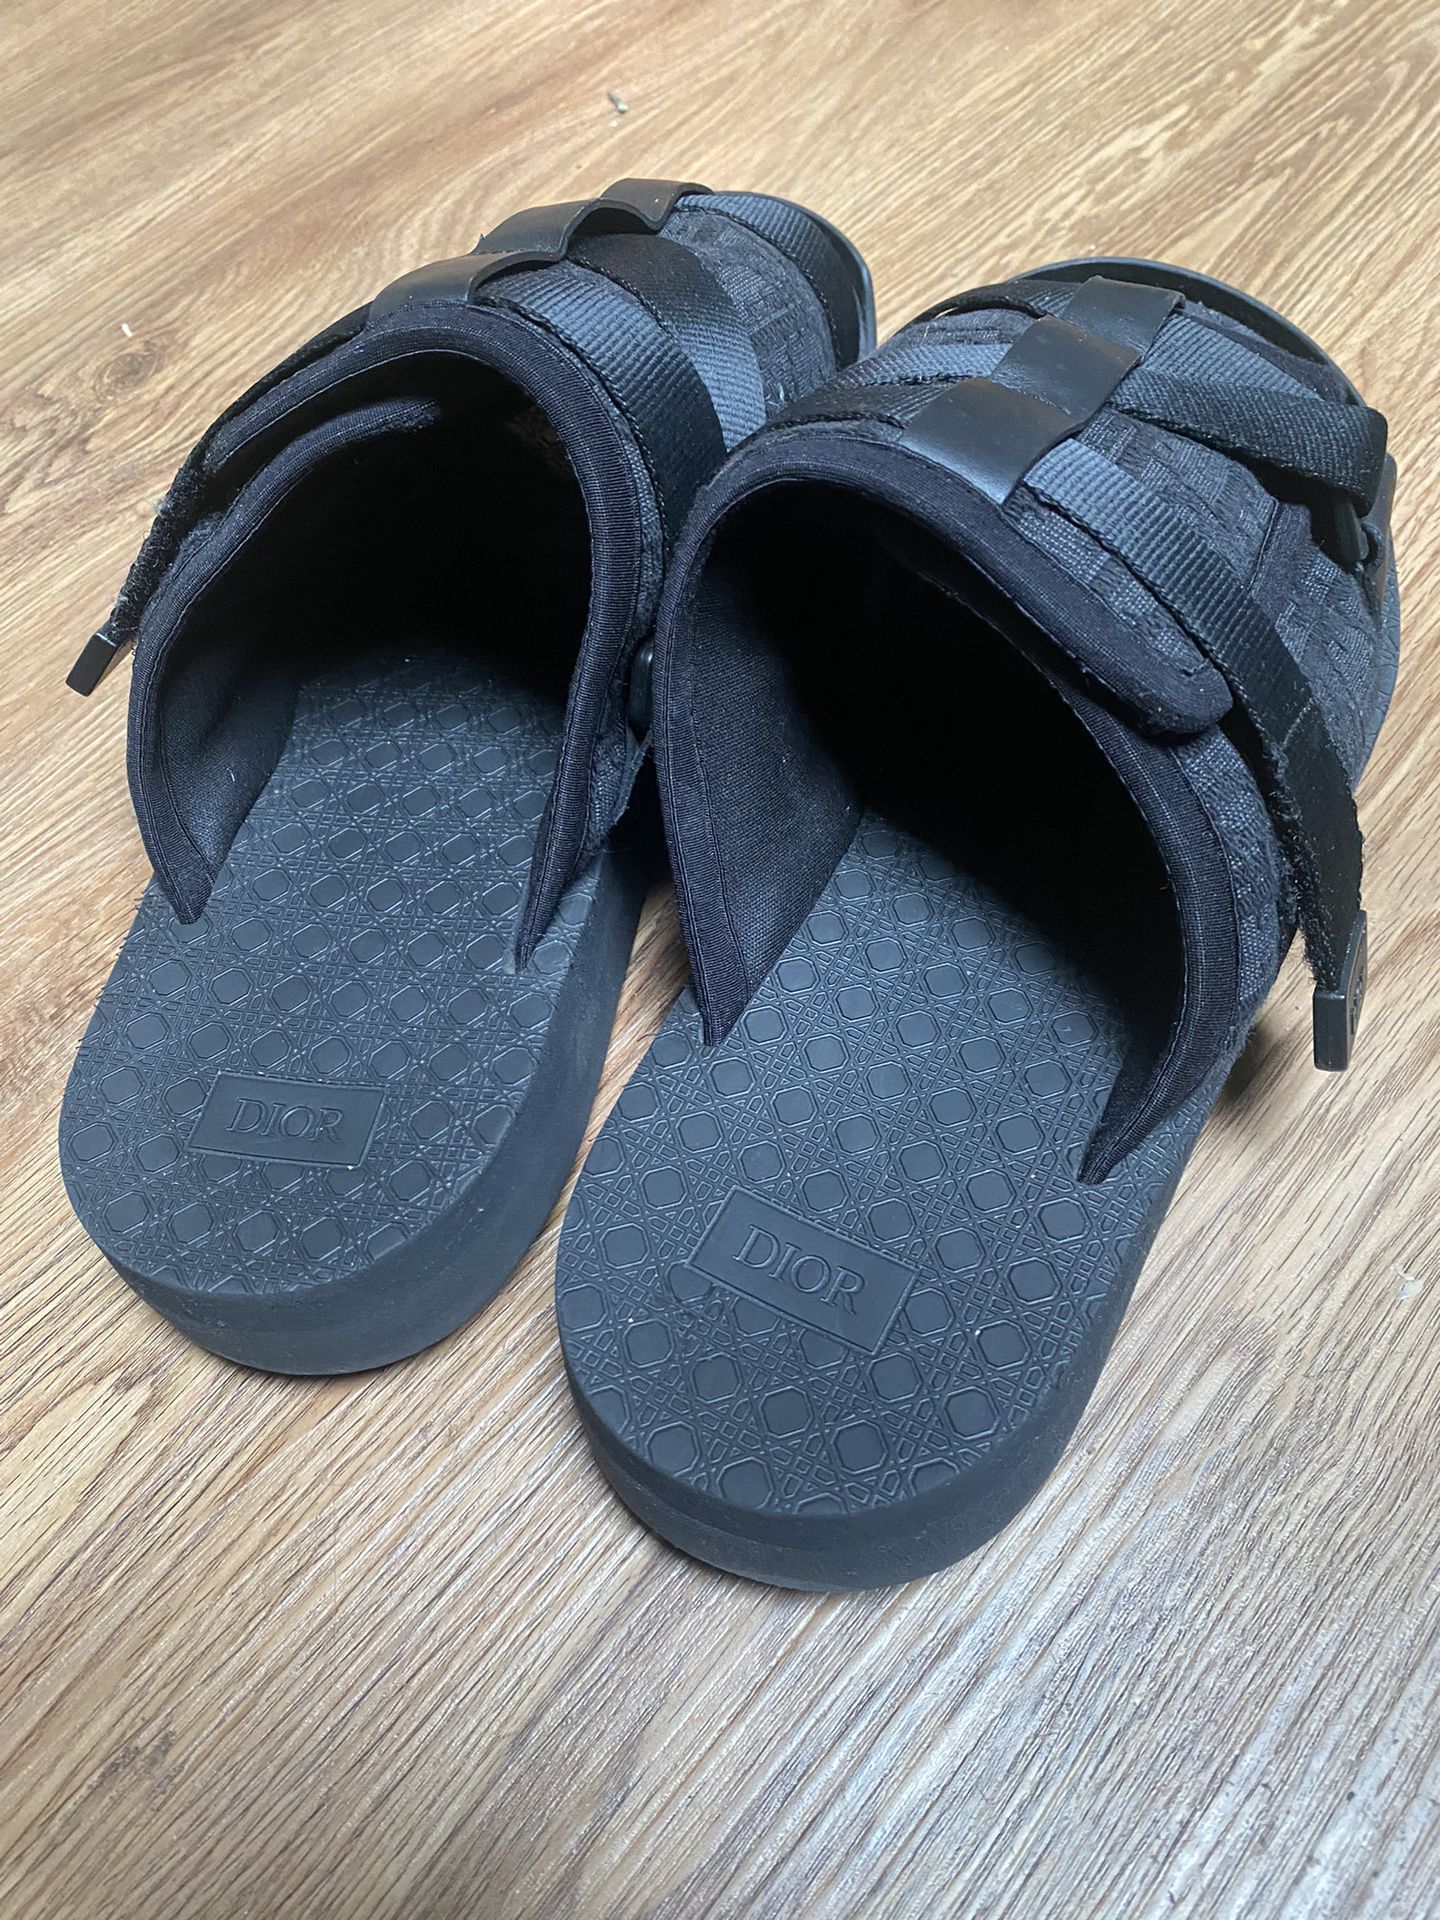 Dior Sandals Size 9 …. And Mom Bag 